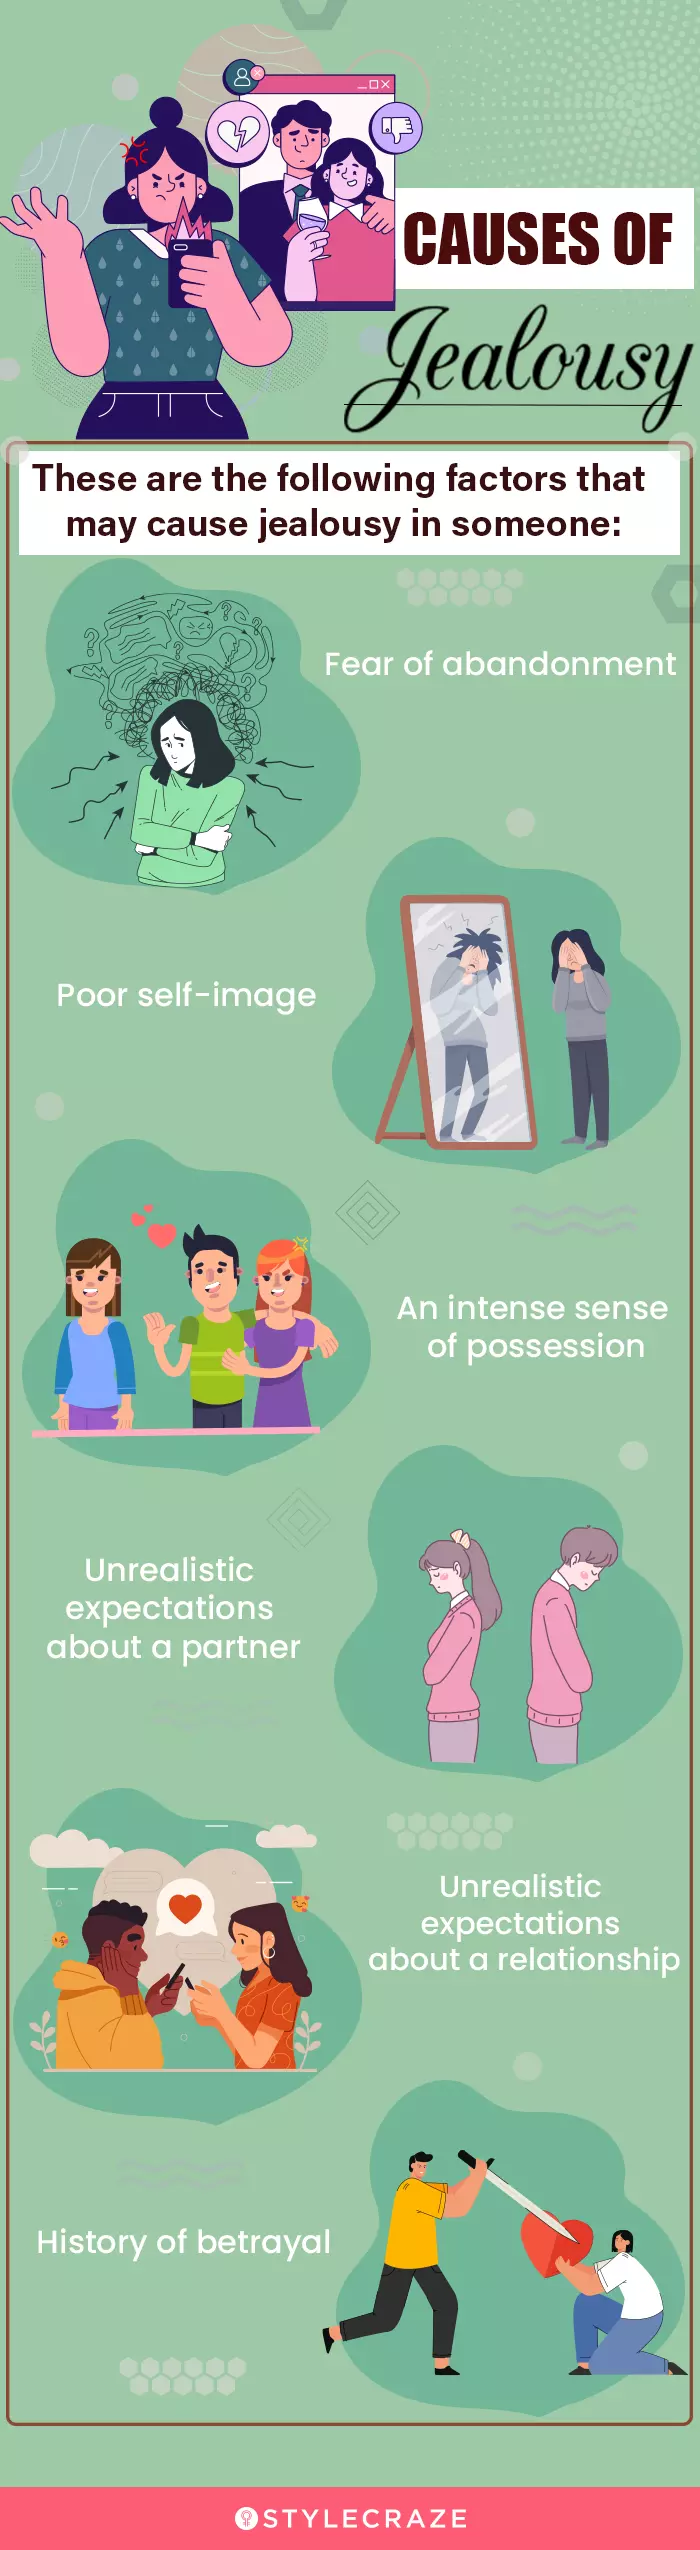 causes of jealousy (infographic)